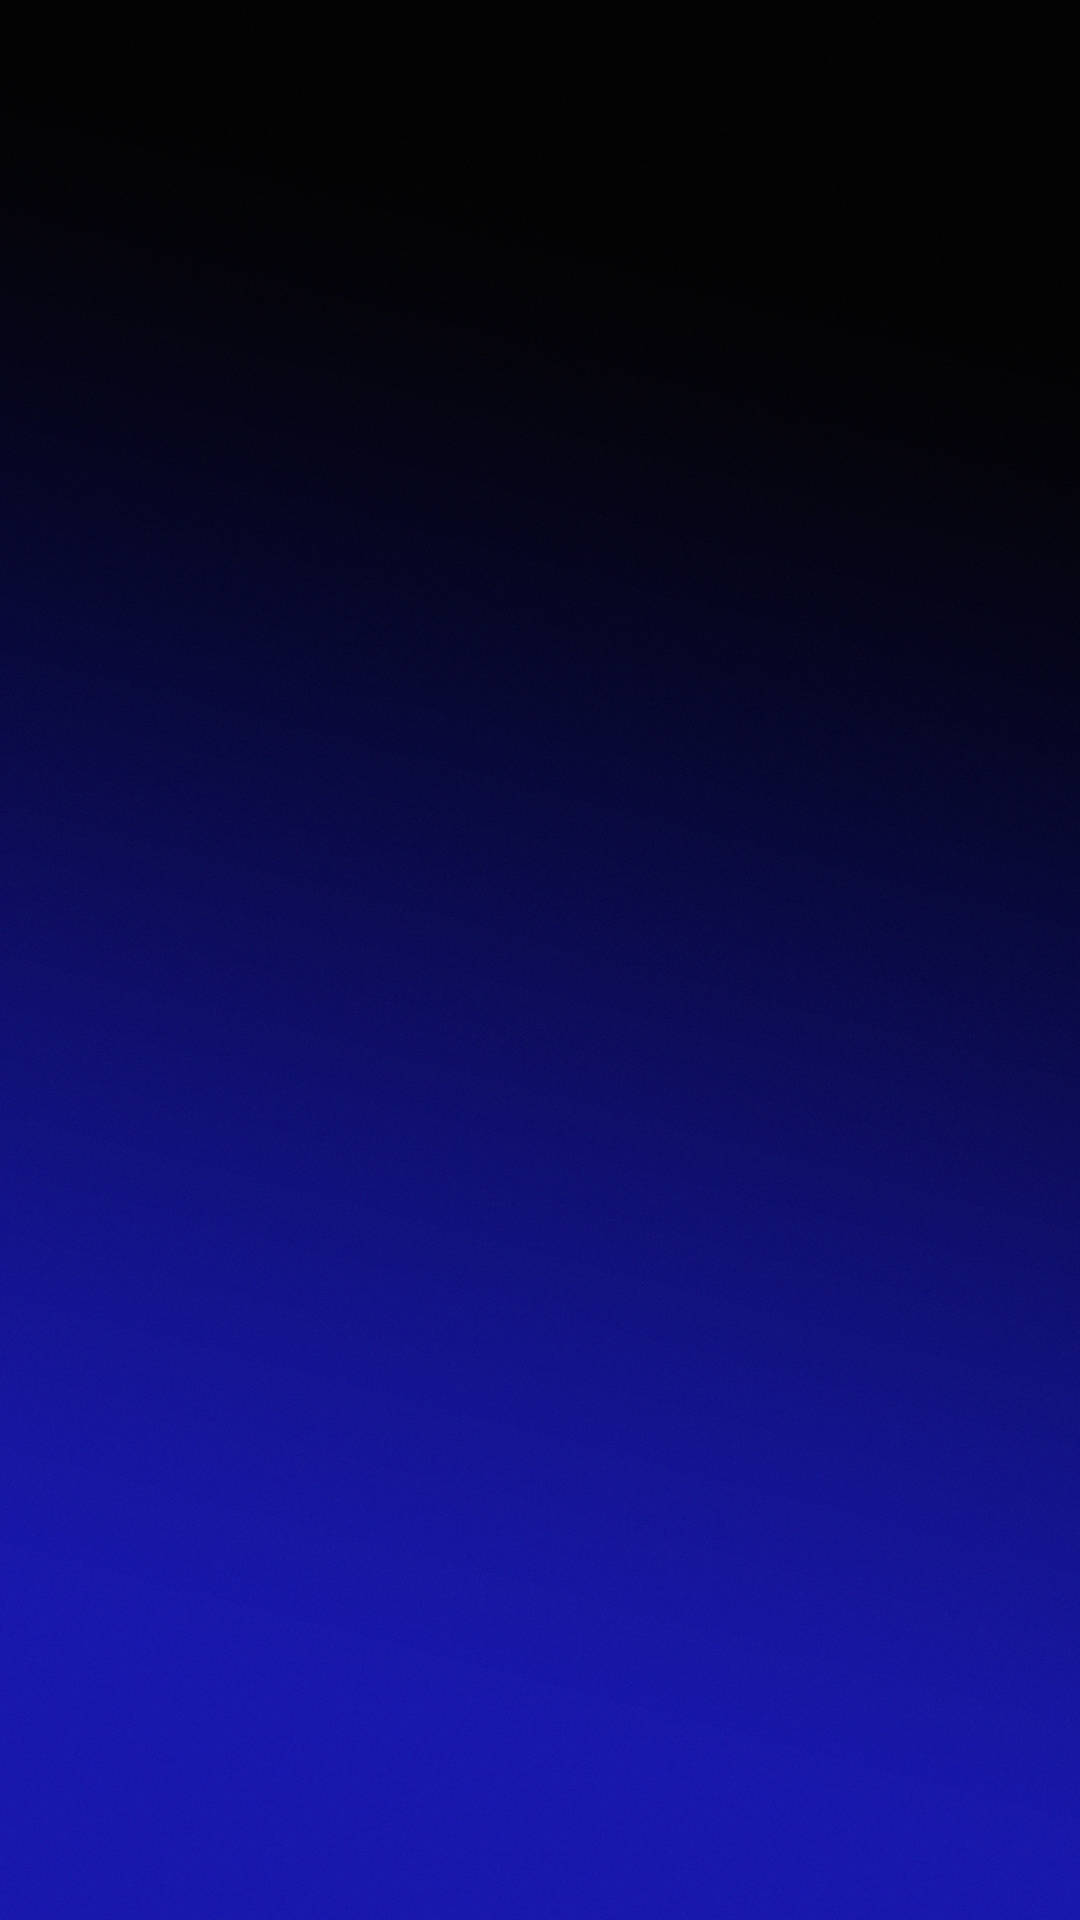 Gradient 3240X5760 Wallpaper and Background Image